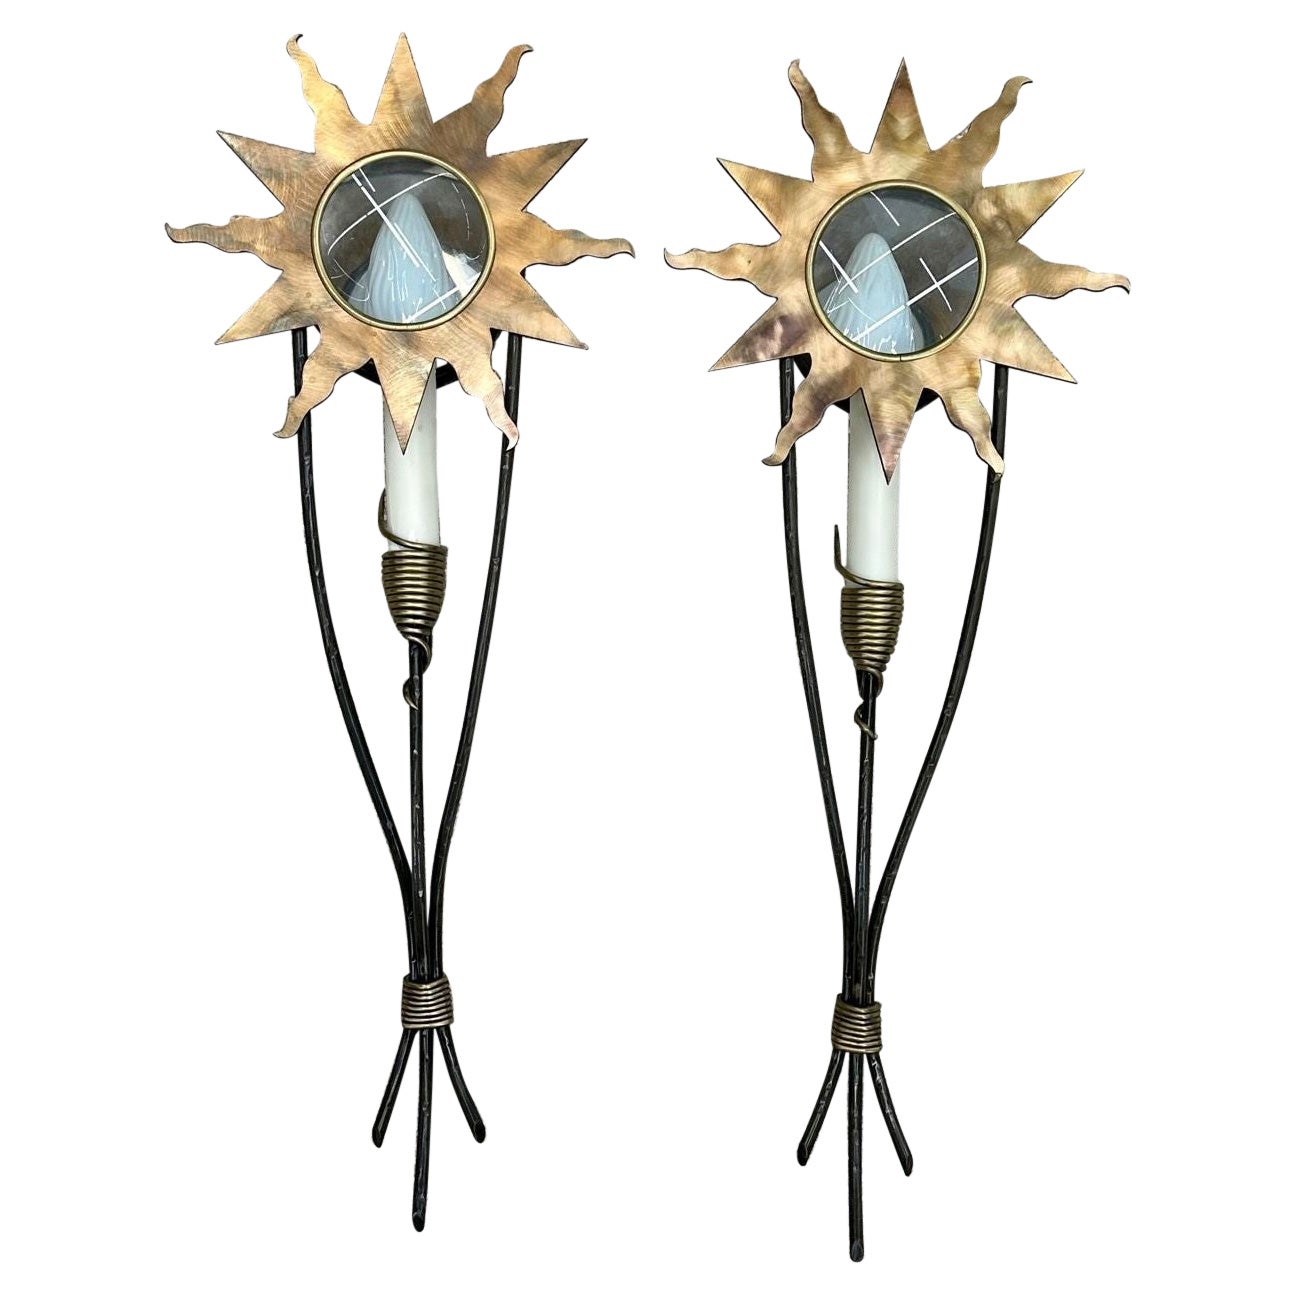 French Mid Century Modern, Olympia Star Sconces, Hammered Brass, Copper, 1960s